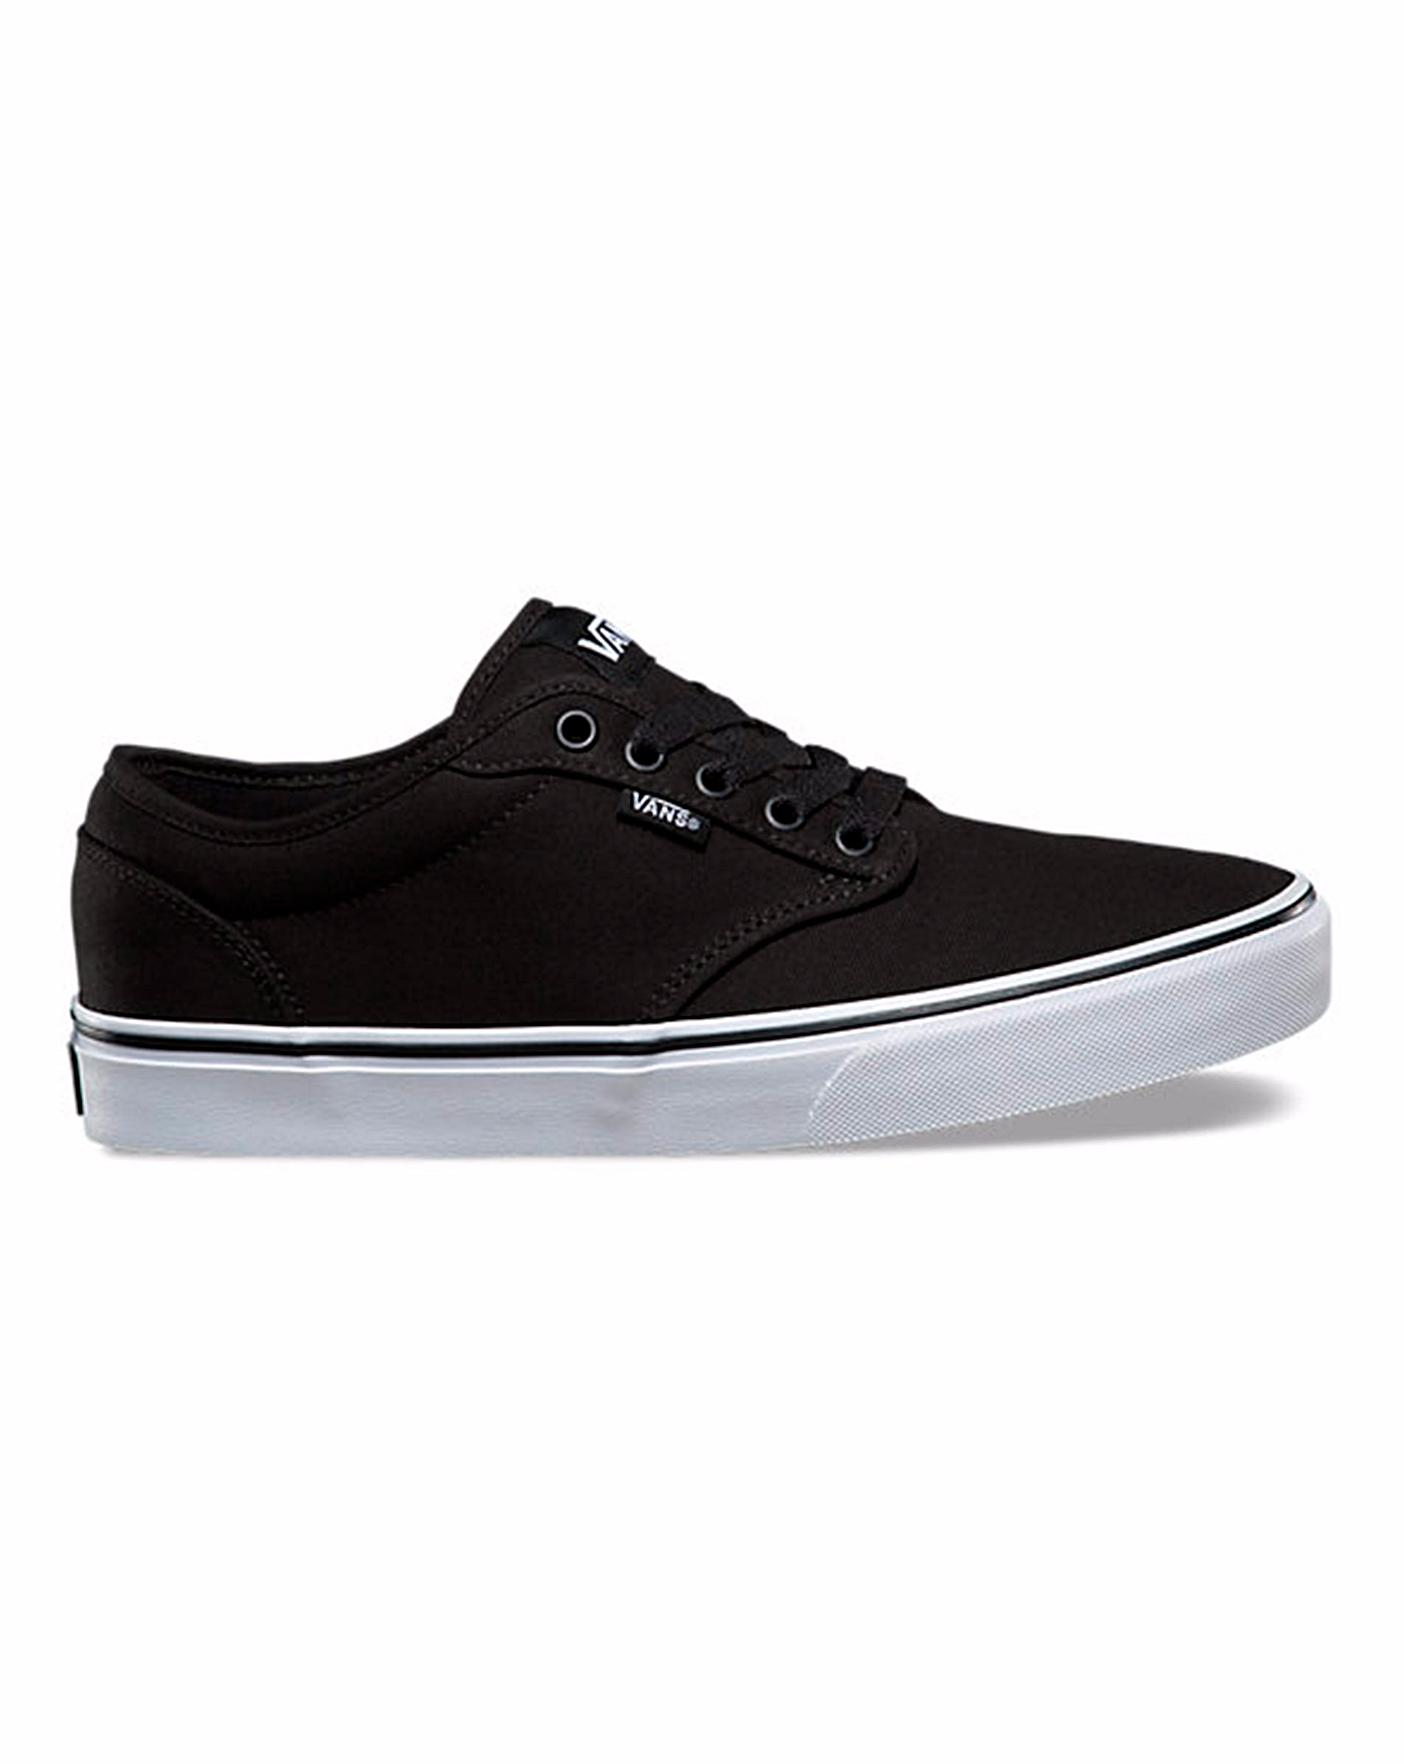 mens van trainers Online Shopping for 